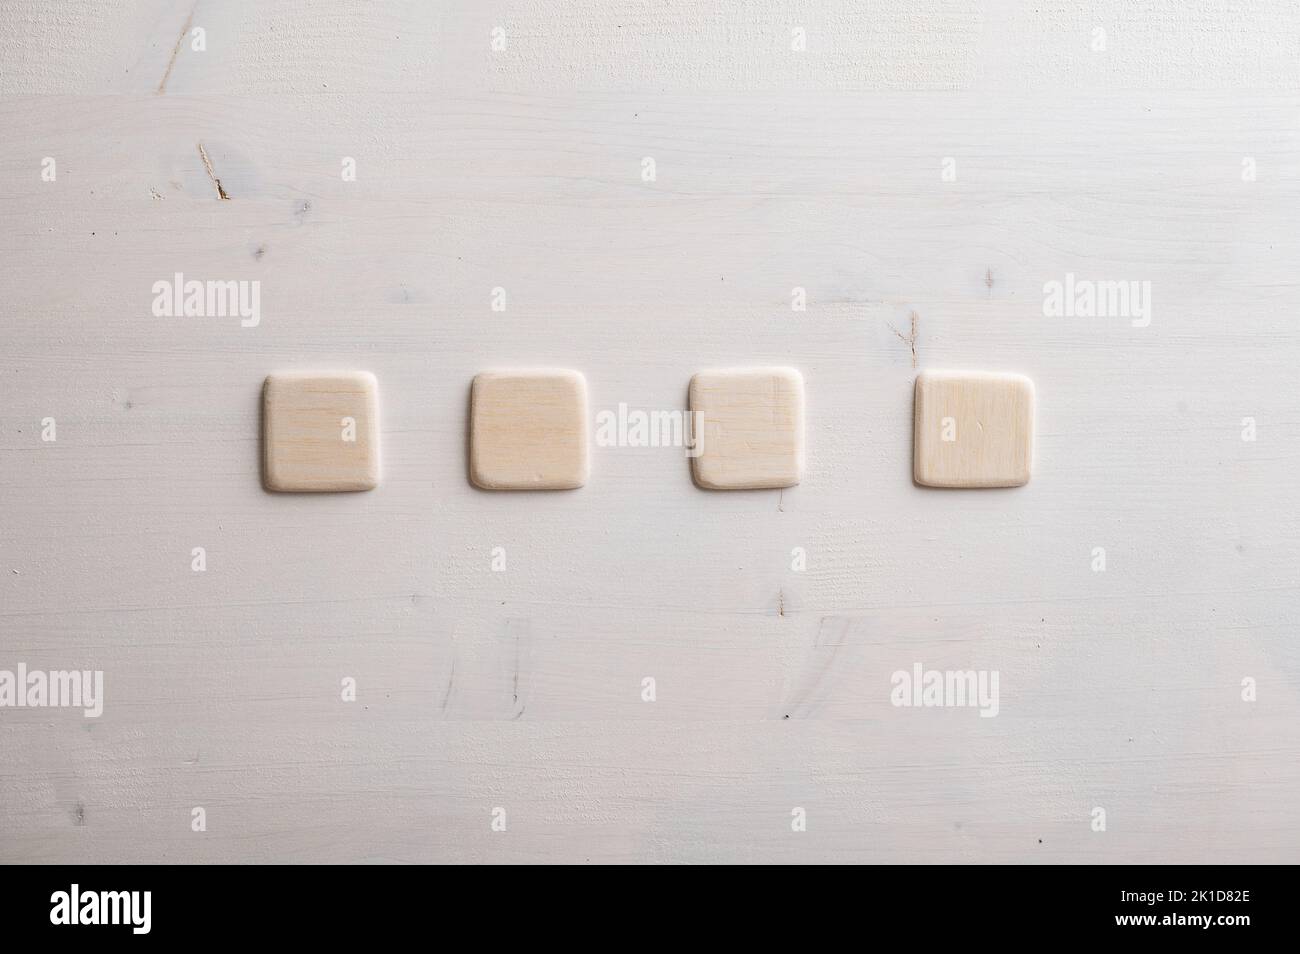 Four blank wooden squares placed in a row over wooden background. Stock Photo